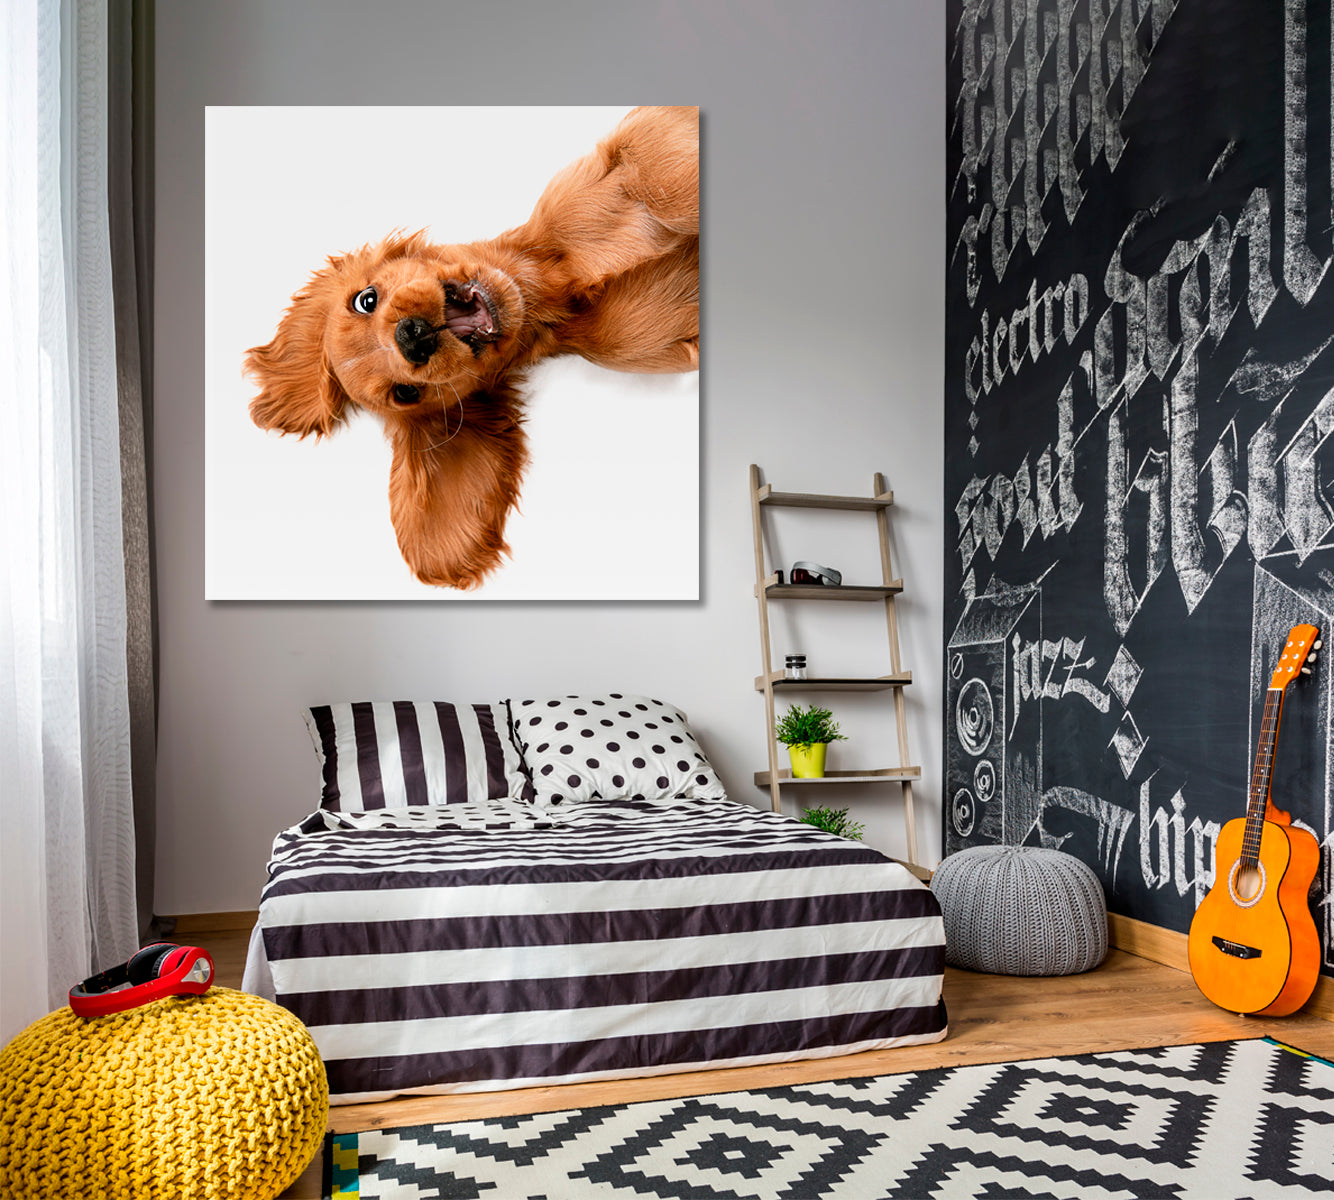 CRAZY PURE YOUTH English Cocker Spaniel Young Funny Cute Dog Kids Room Art - Square Panel Animals Canvas Print Artesty 1 Panel 12"x12" 